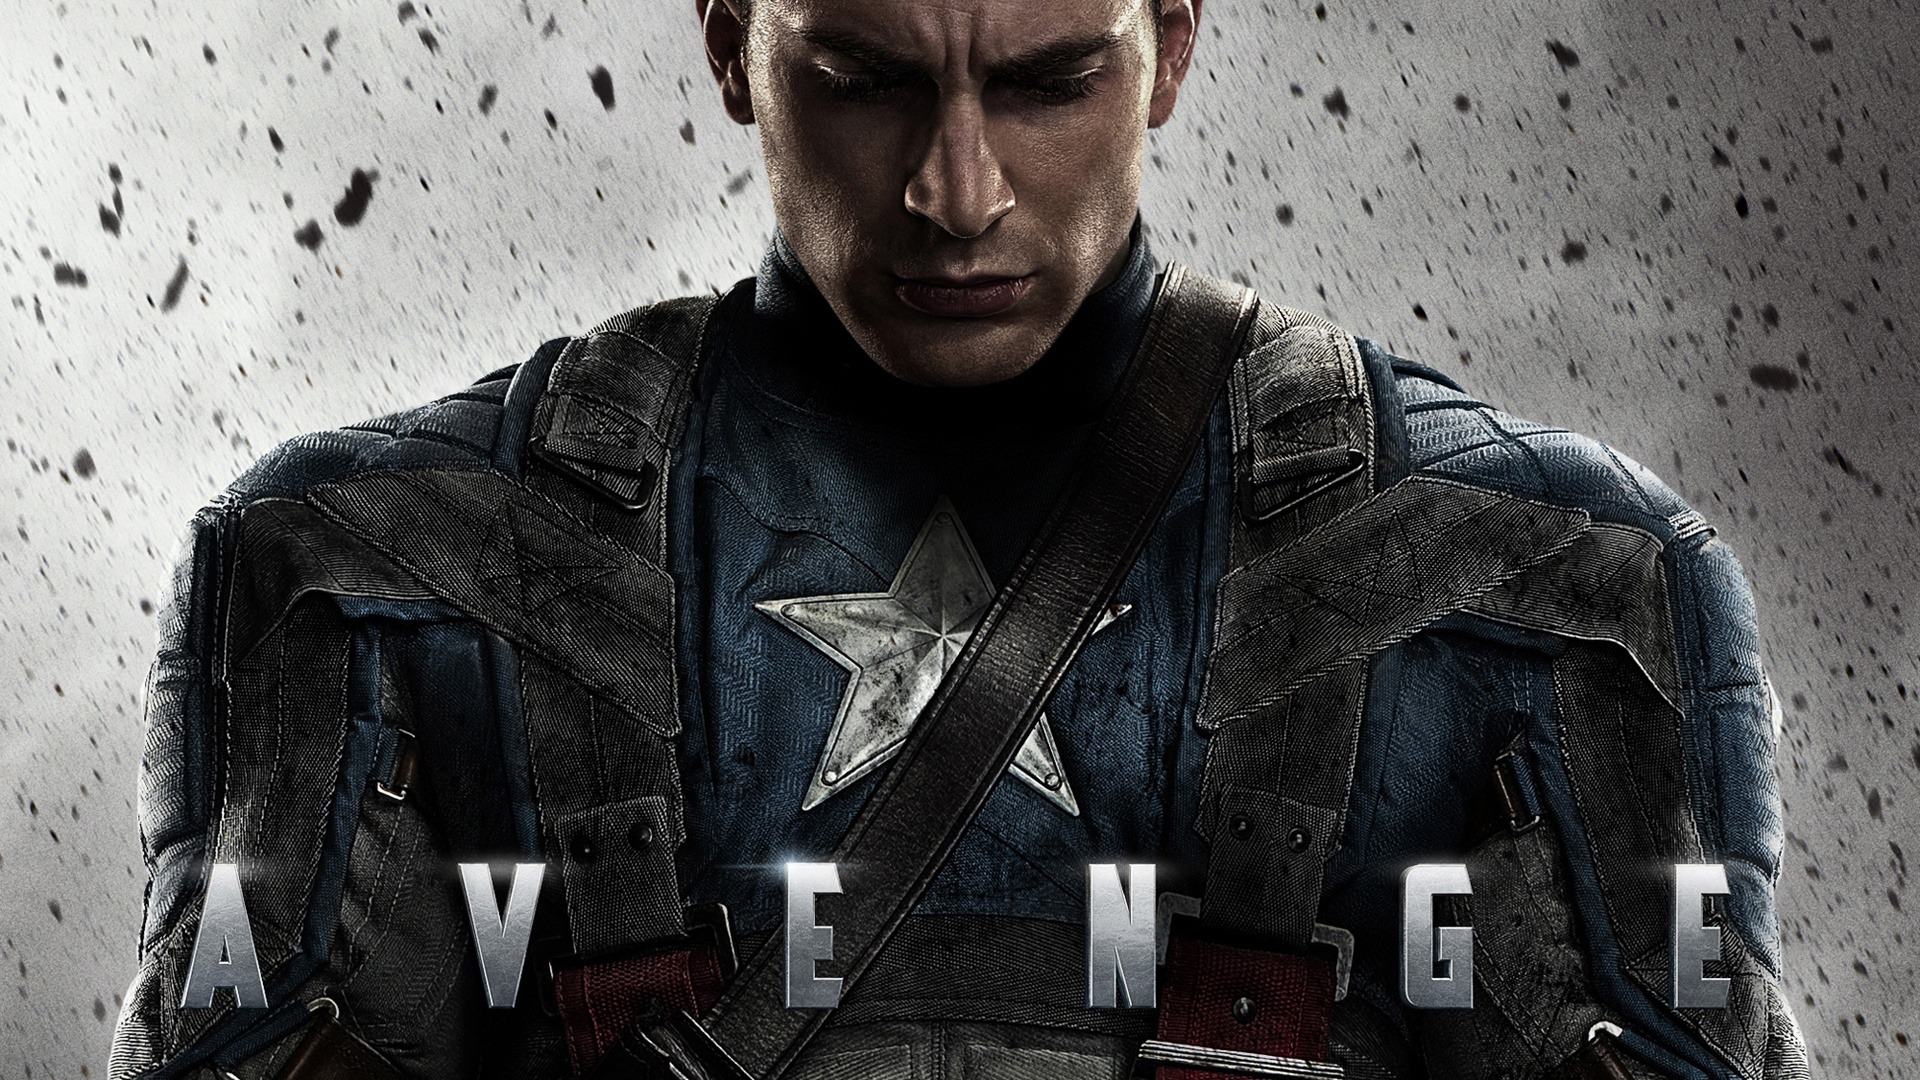 Captain America: The First Avenger wallpapers HD #14 - 1920x1080